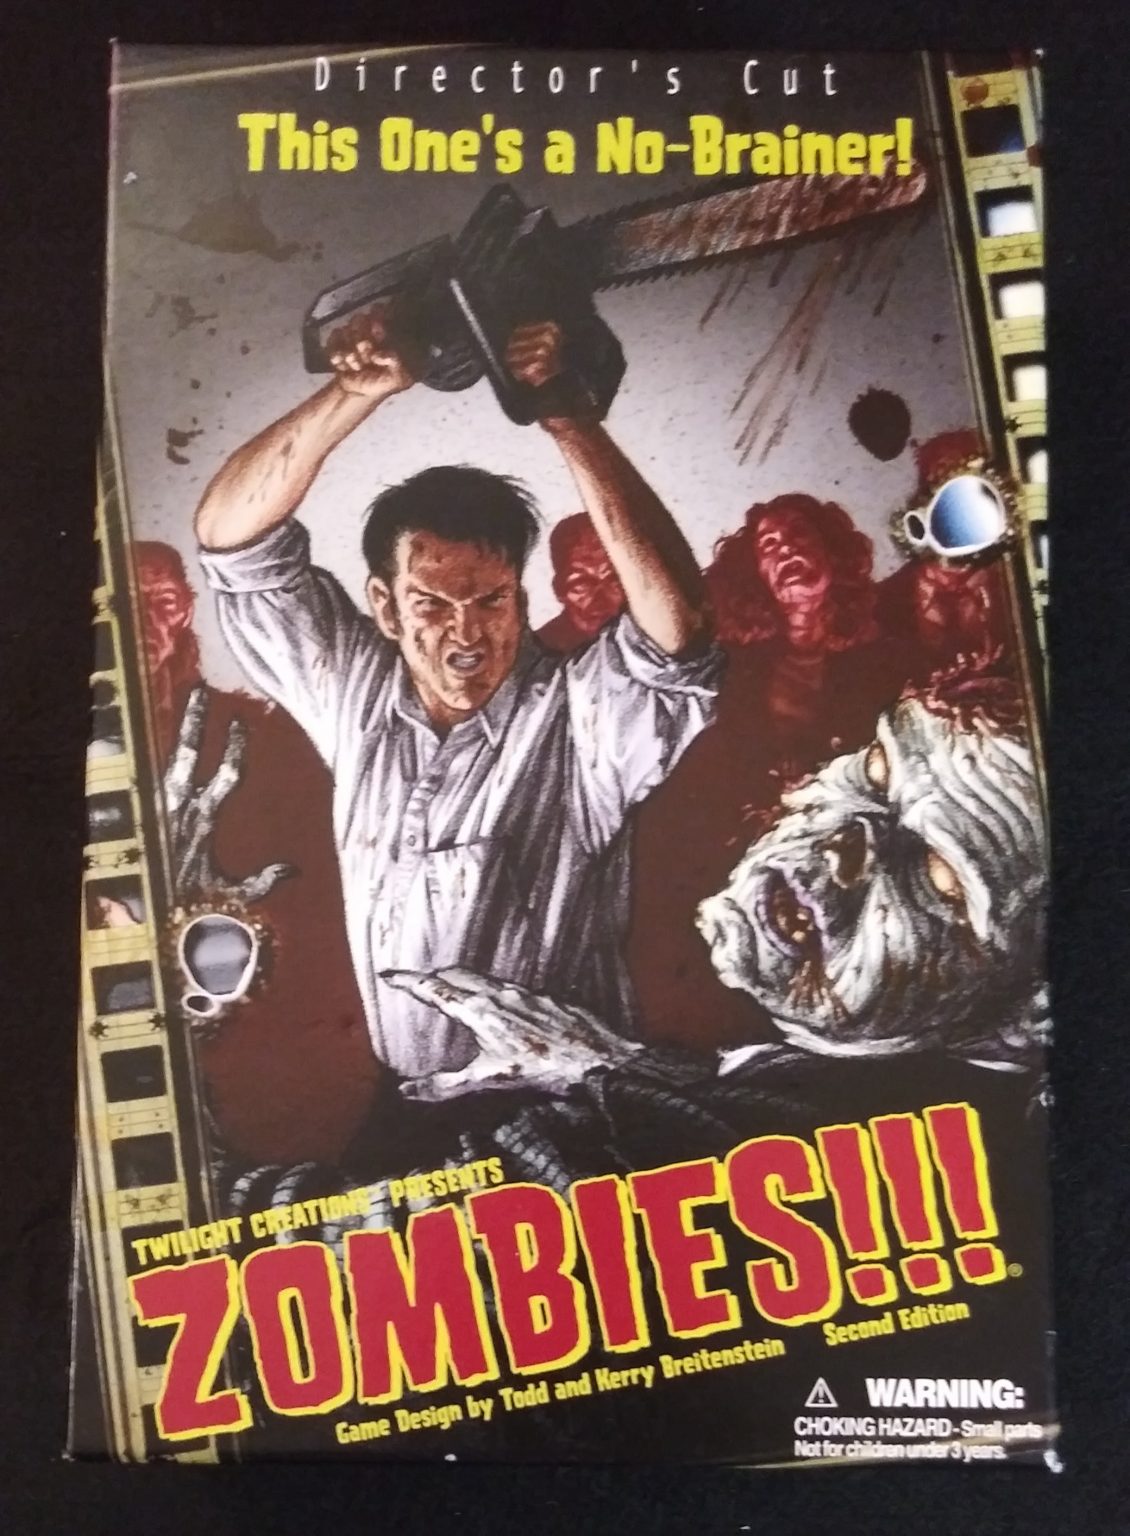 Directors Cut W Expansion Mall Walkers for sale online Twilight Creations Zombies Game 2nd Ed 